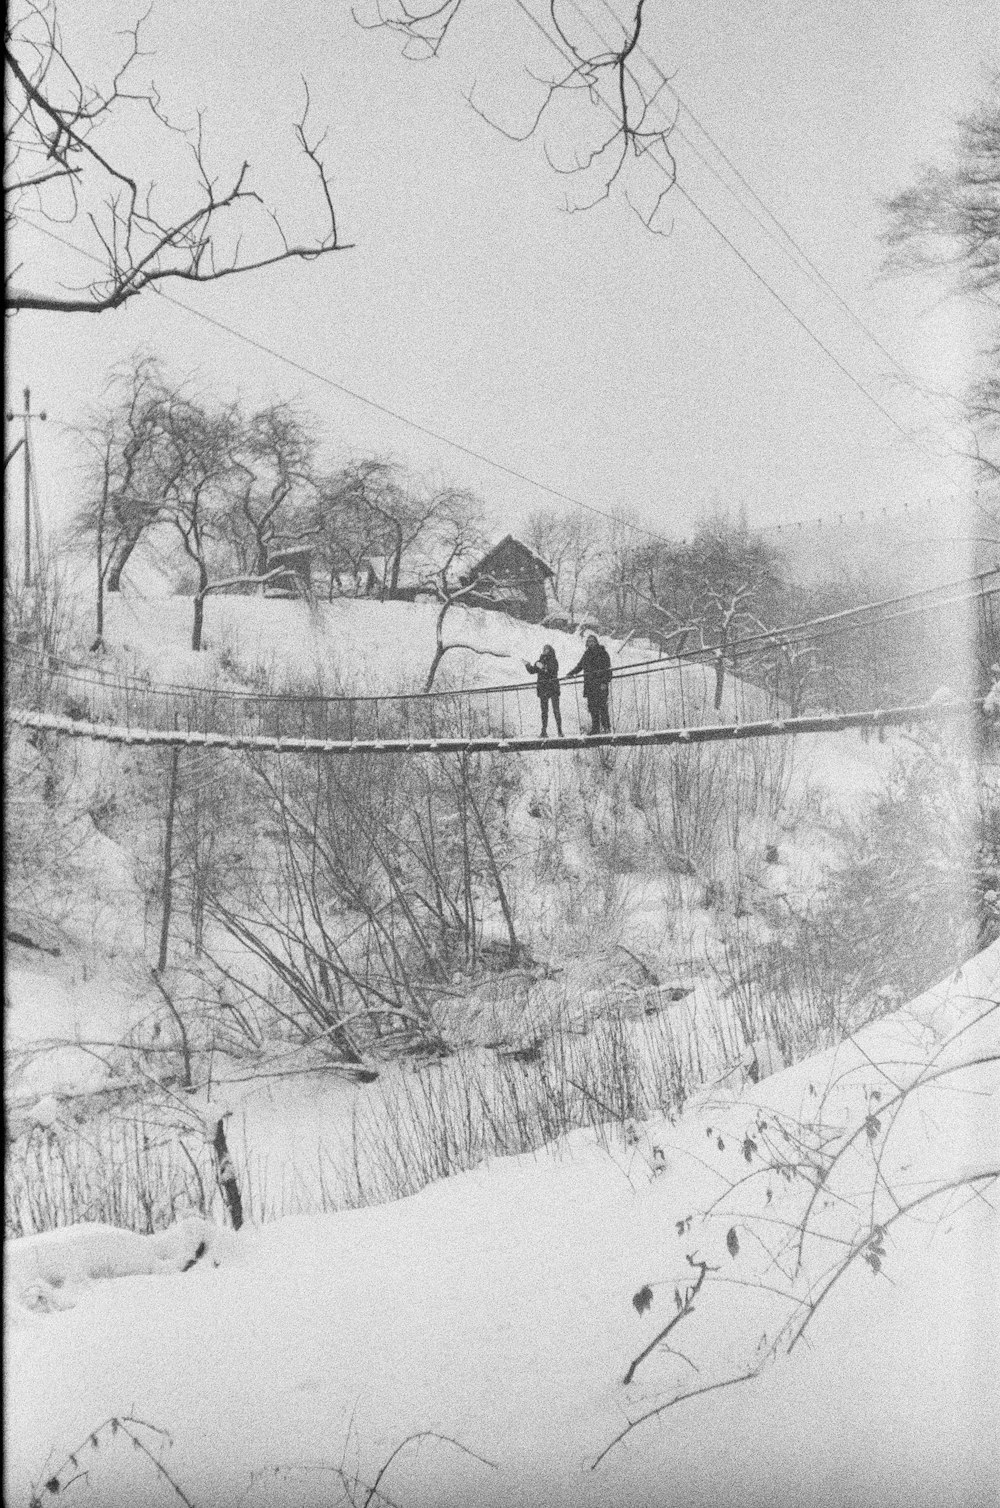 a couple of people walking across a snow covered bridge